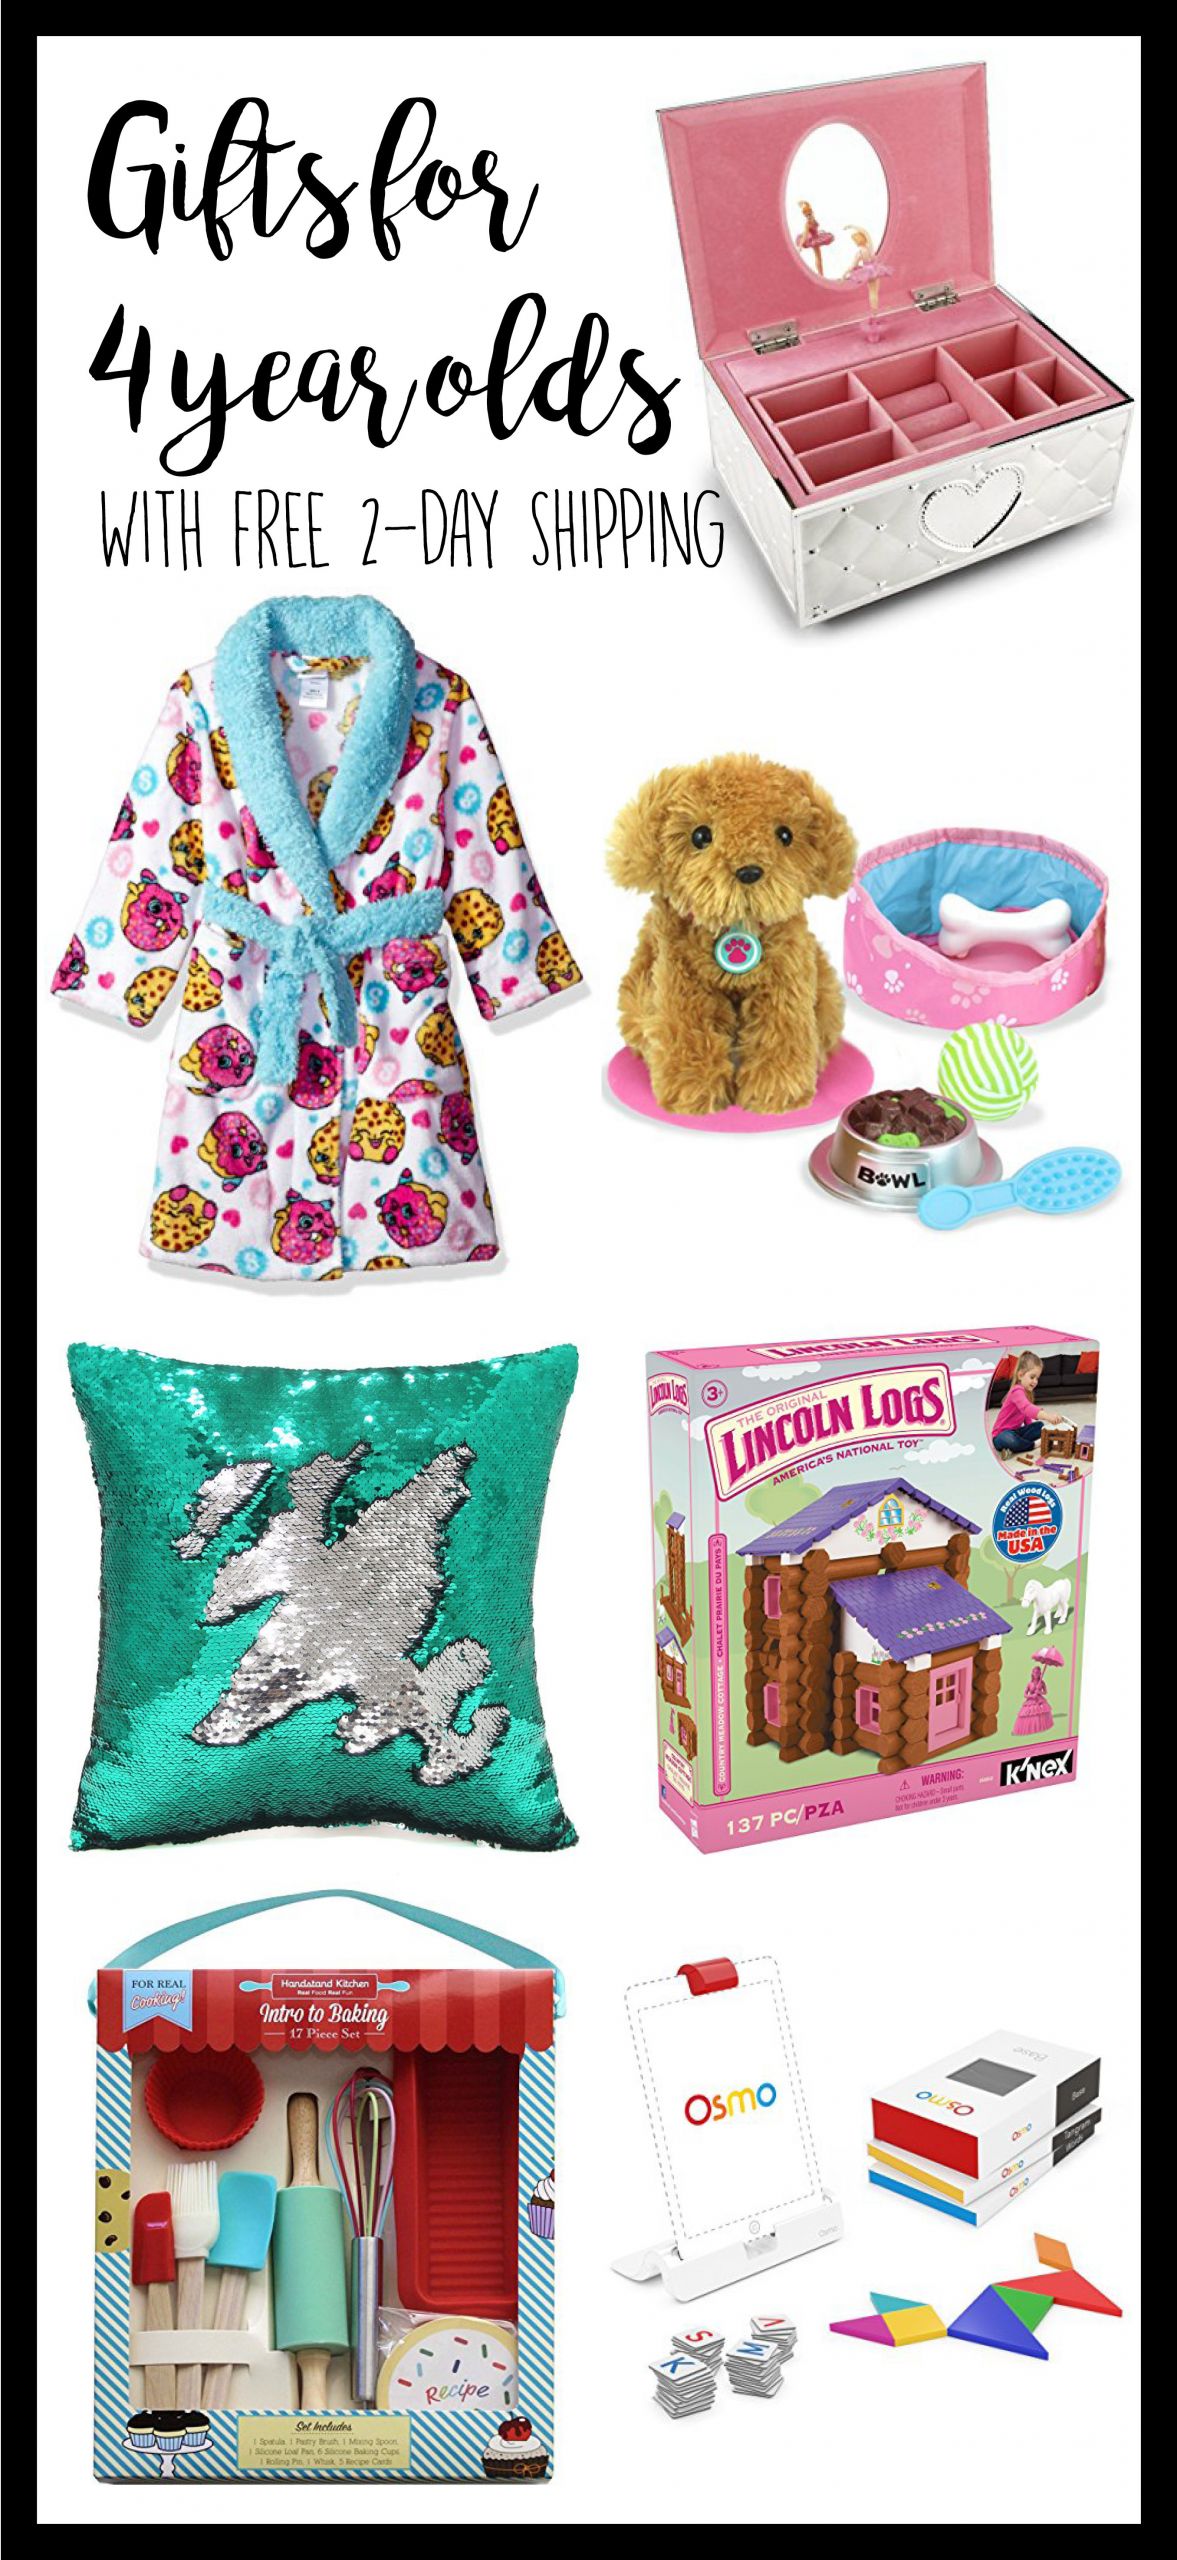 Birthday Gift For 4 Year Old Girl
 4 Year Old Gift Ideas Gift ideas for 4 year old Girls